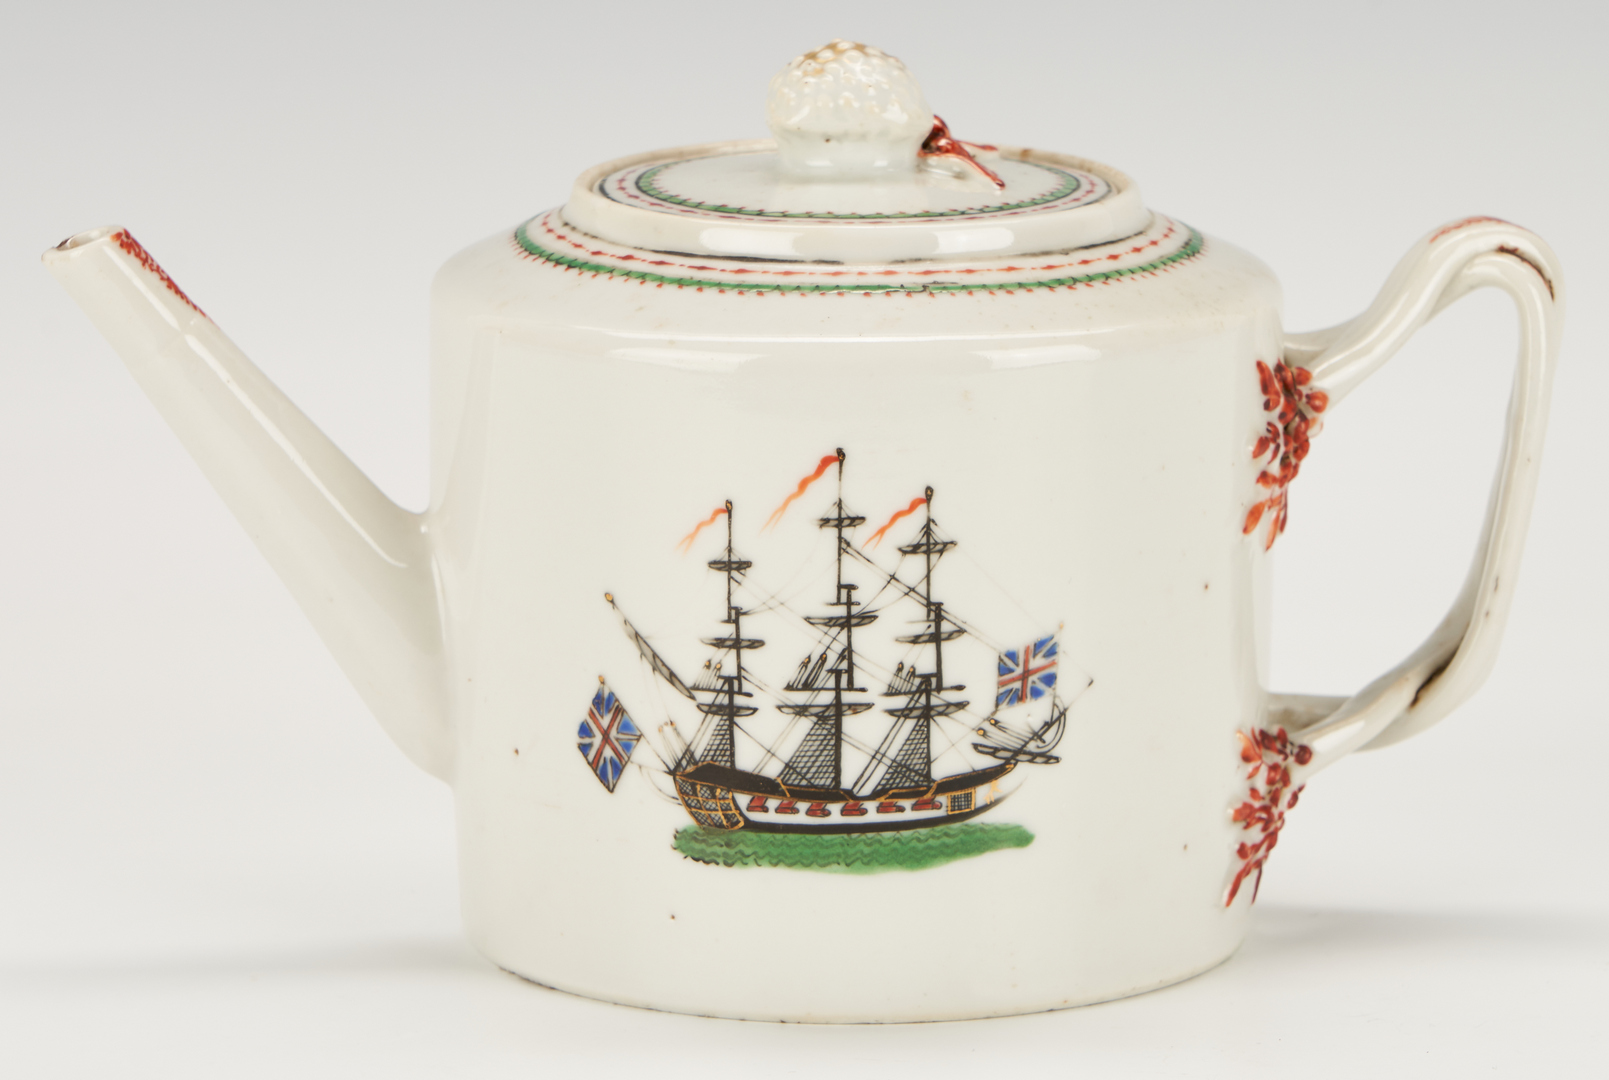 Lot 31: Chinese Export Porcelain Teapot with Ship Decoration